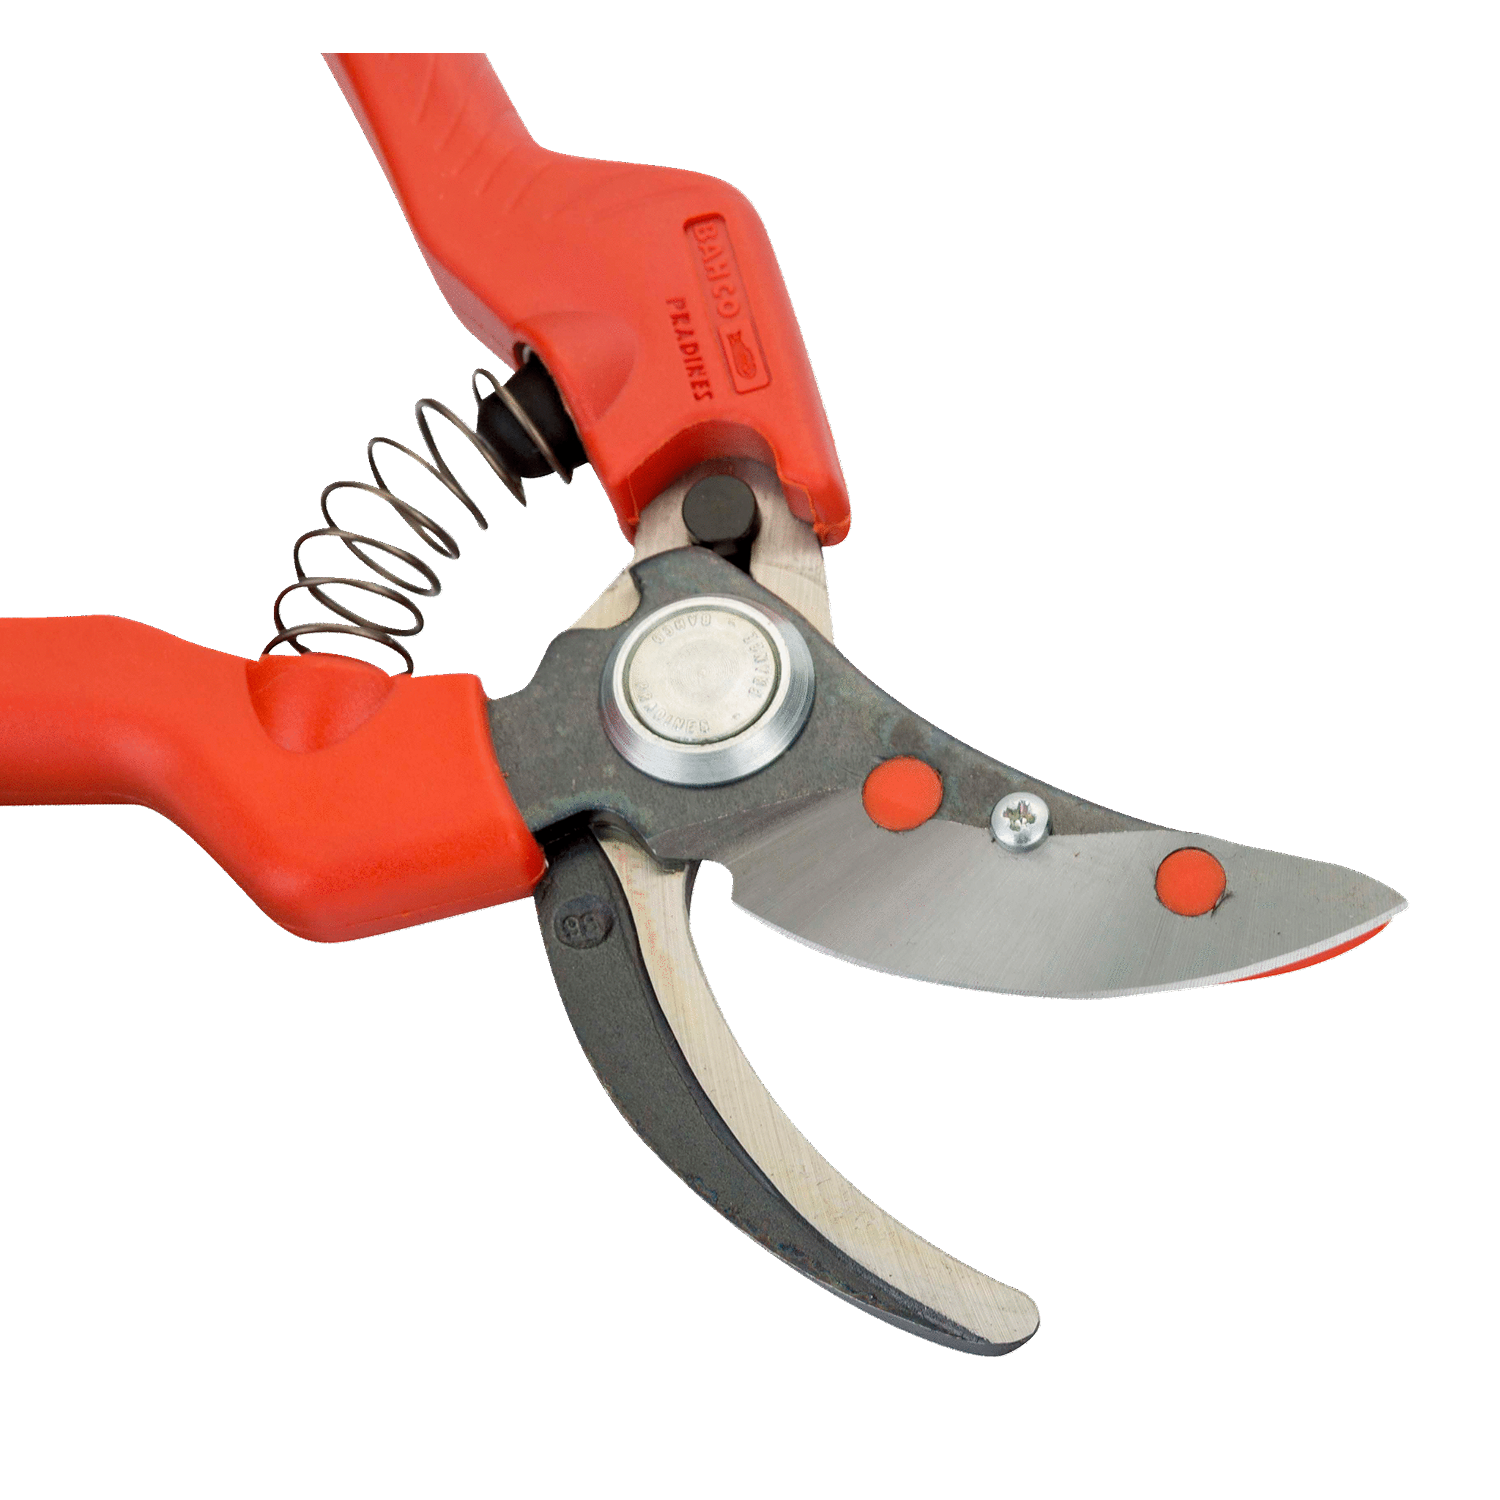 BAHCO P64 Cut and Hold Secateurs with Composite Handle - Premium Secateurs from BAHCO - Shop now at Yew Aik.